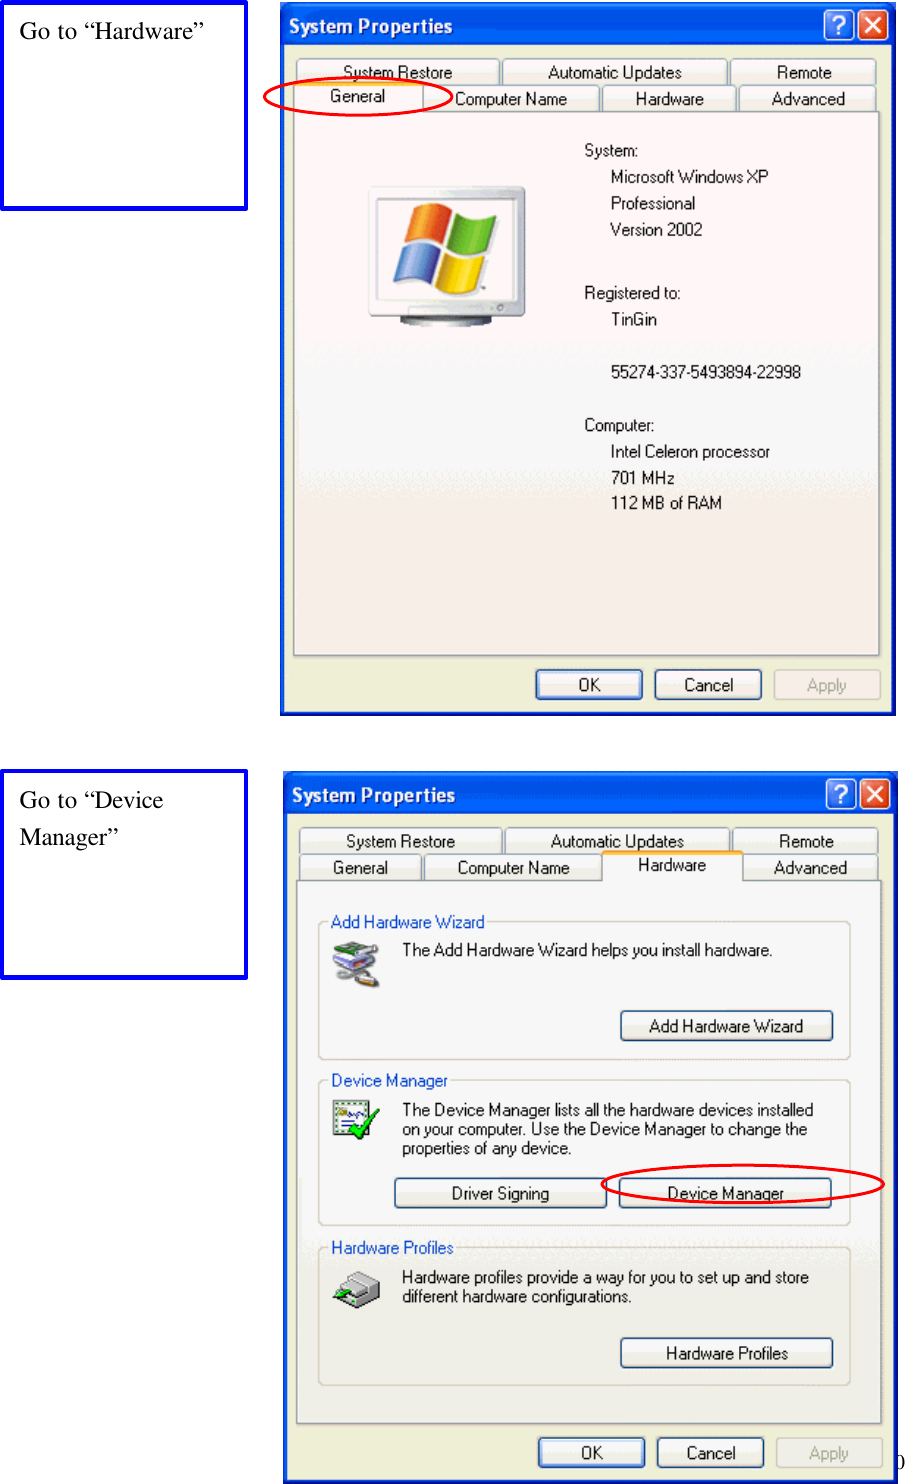  20                                      Go to “Device Manager” Go to “Hardware” 